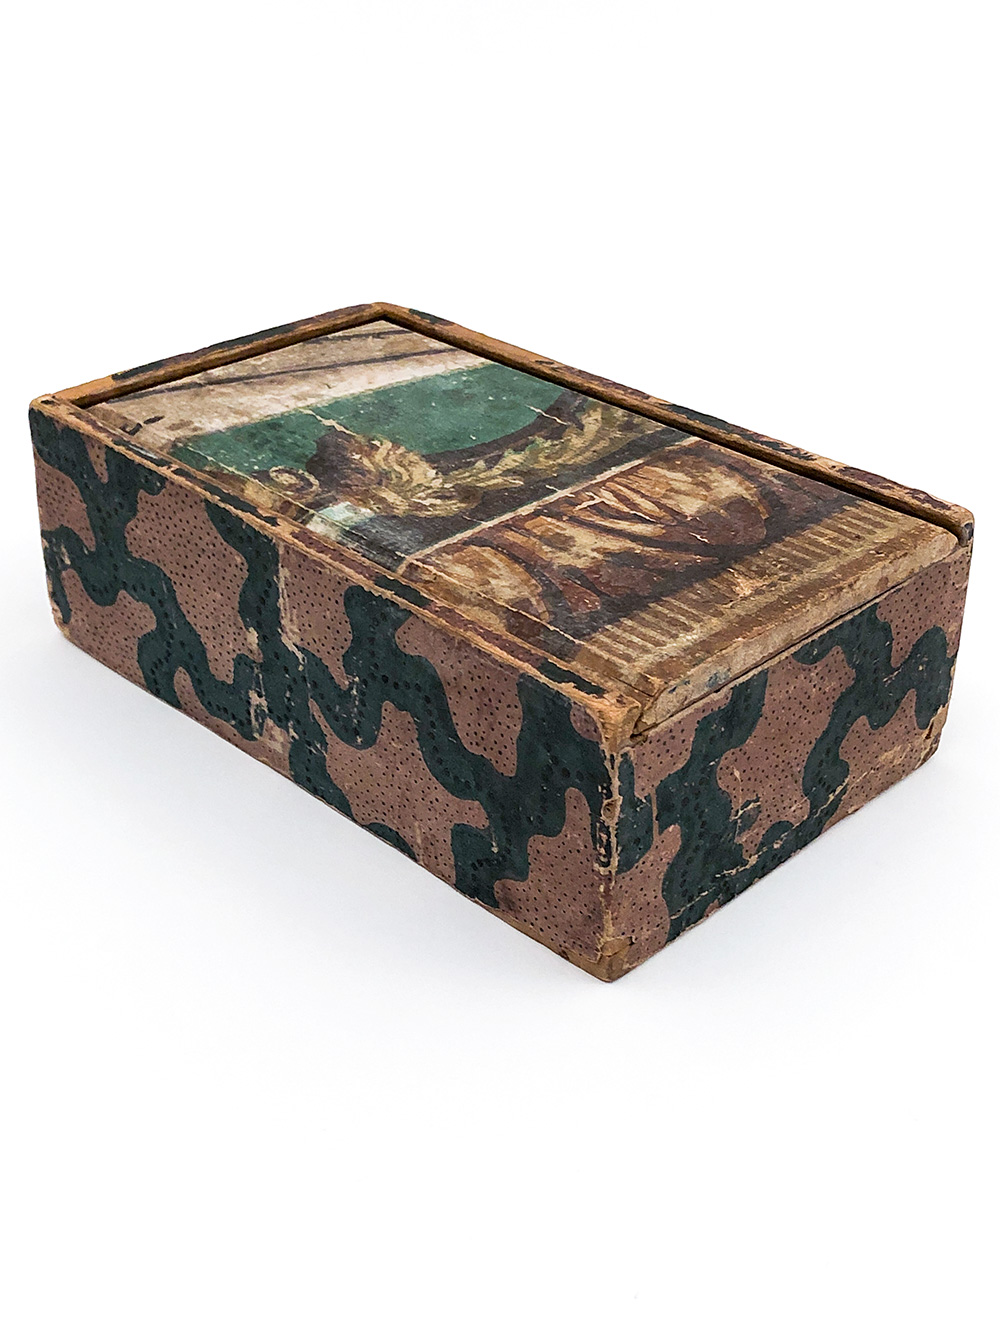 Antique Wallpaper Box in the Form of a Spice Box